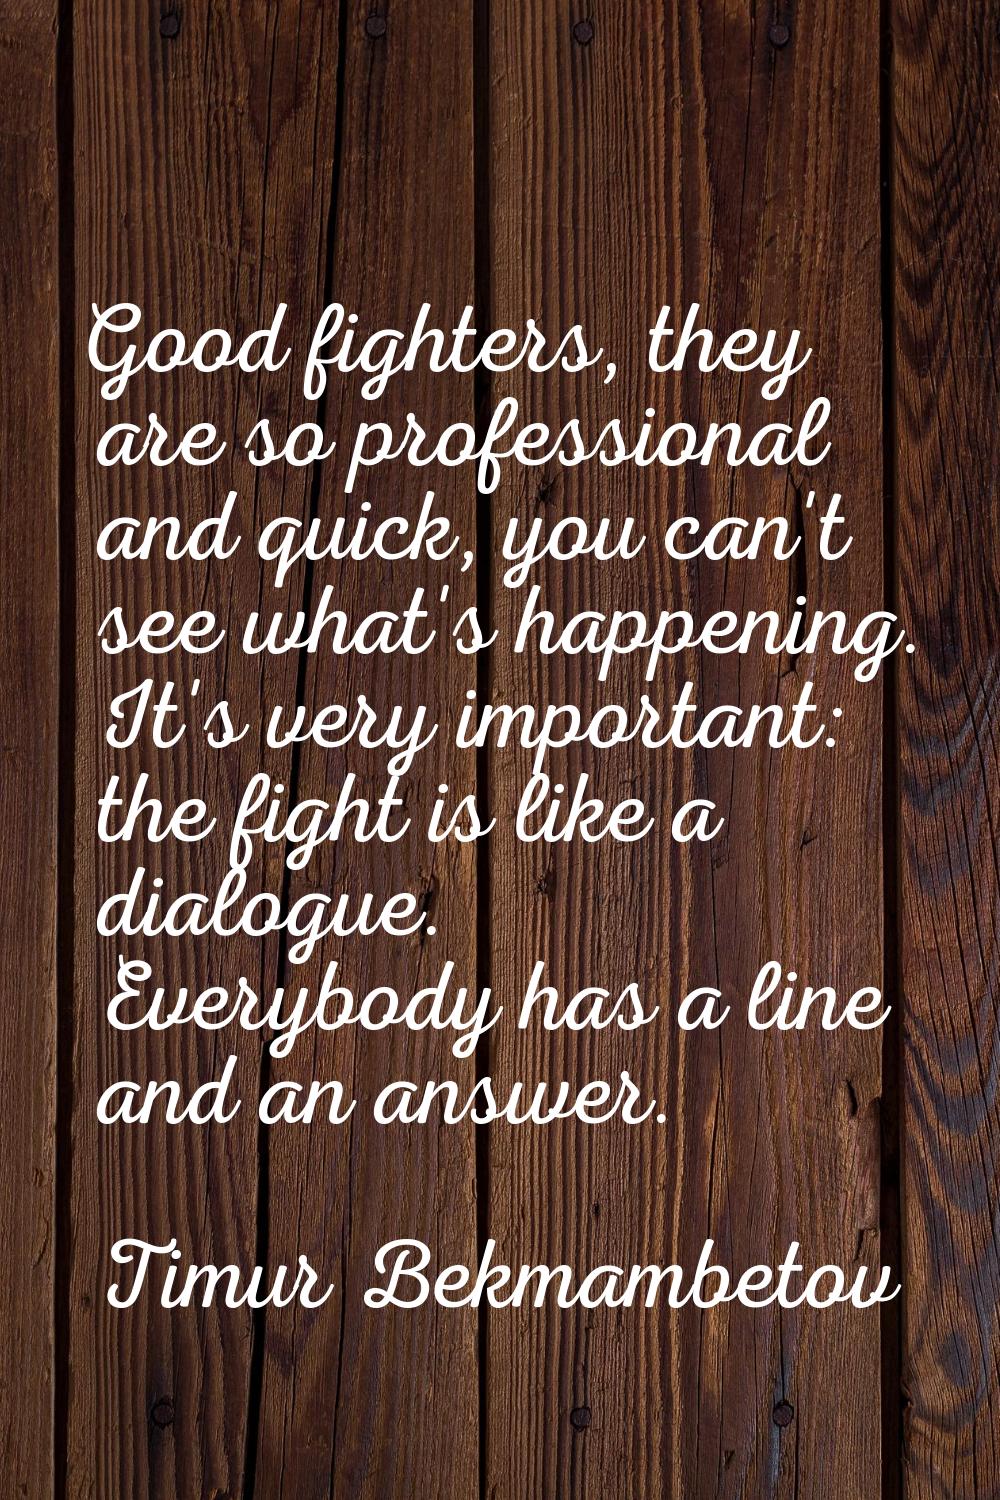 Good fighters, they are so professional and quick, you can't see what's happening. It's very import